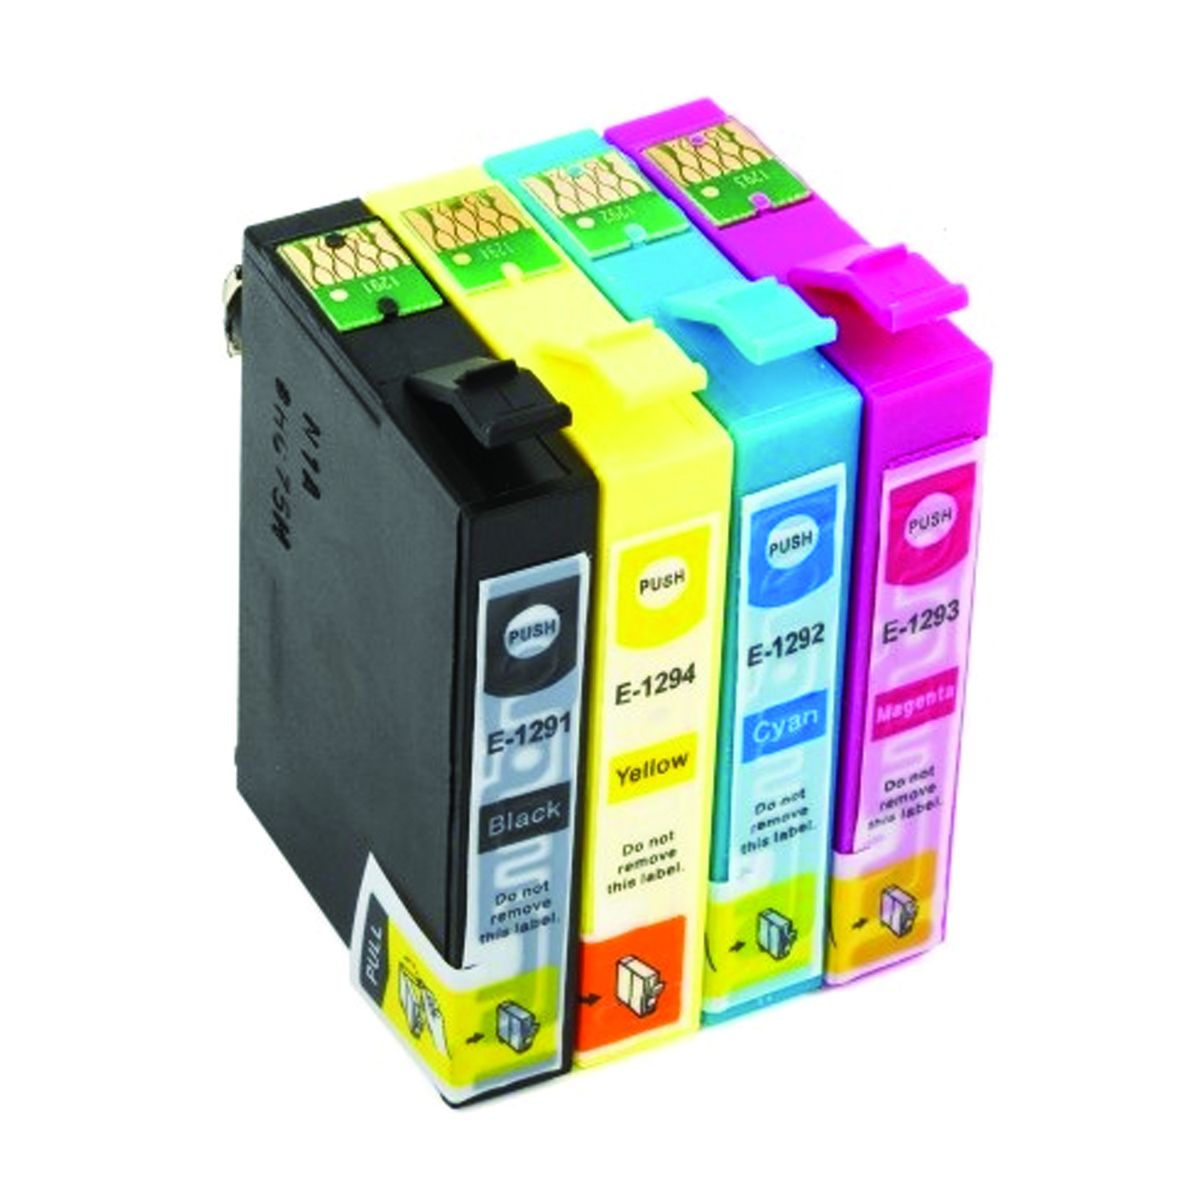 Compatible Epson T1291t1292t1293t1294 Ink Cartridge Combo Set Bcmy Shop Today Get It 9794